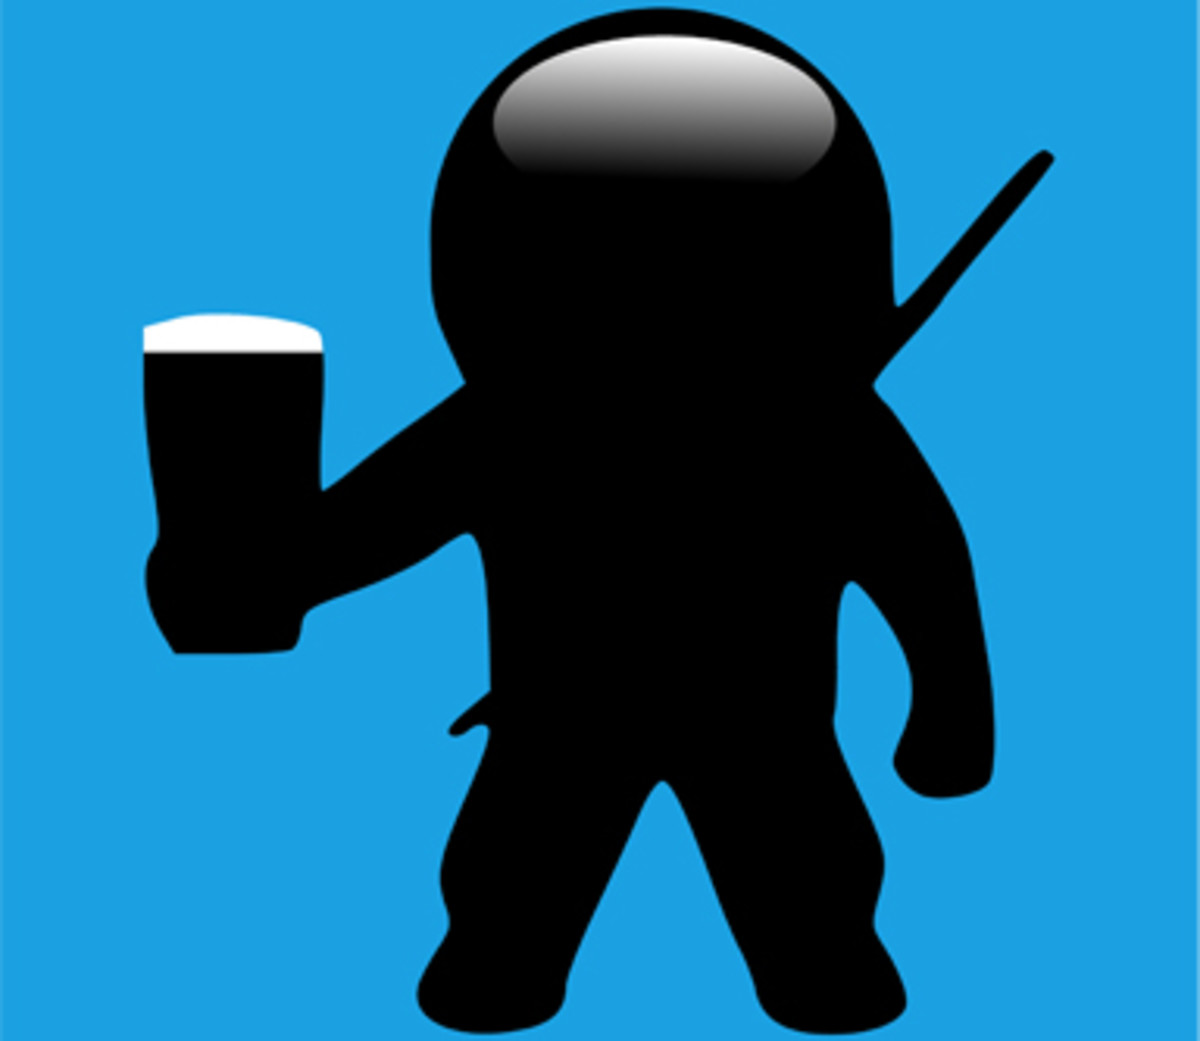 Beer Buddy - Drink with me! - Apps on Google Play